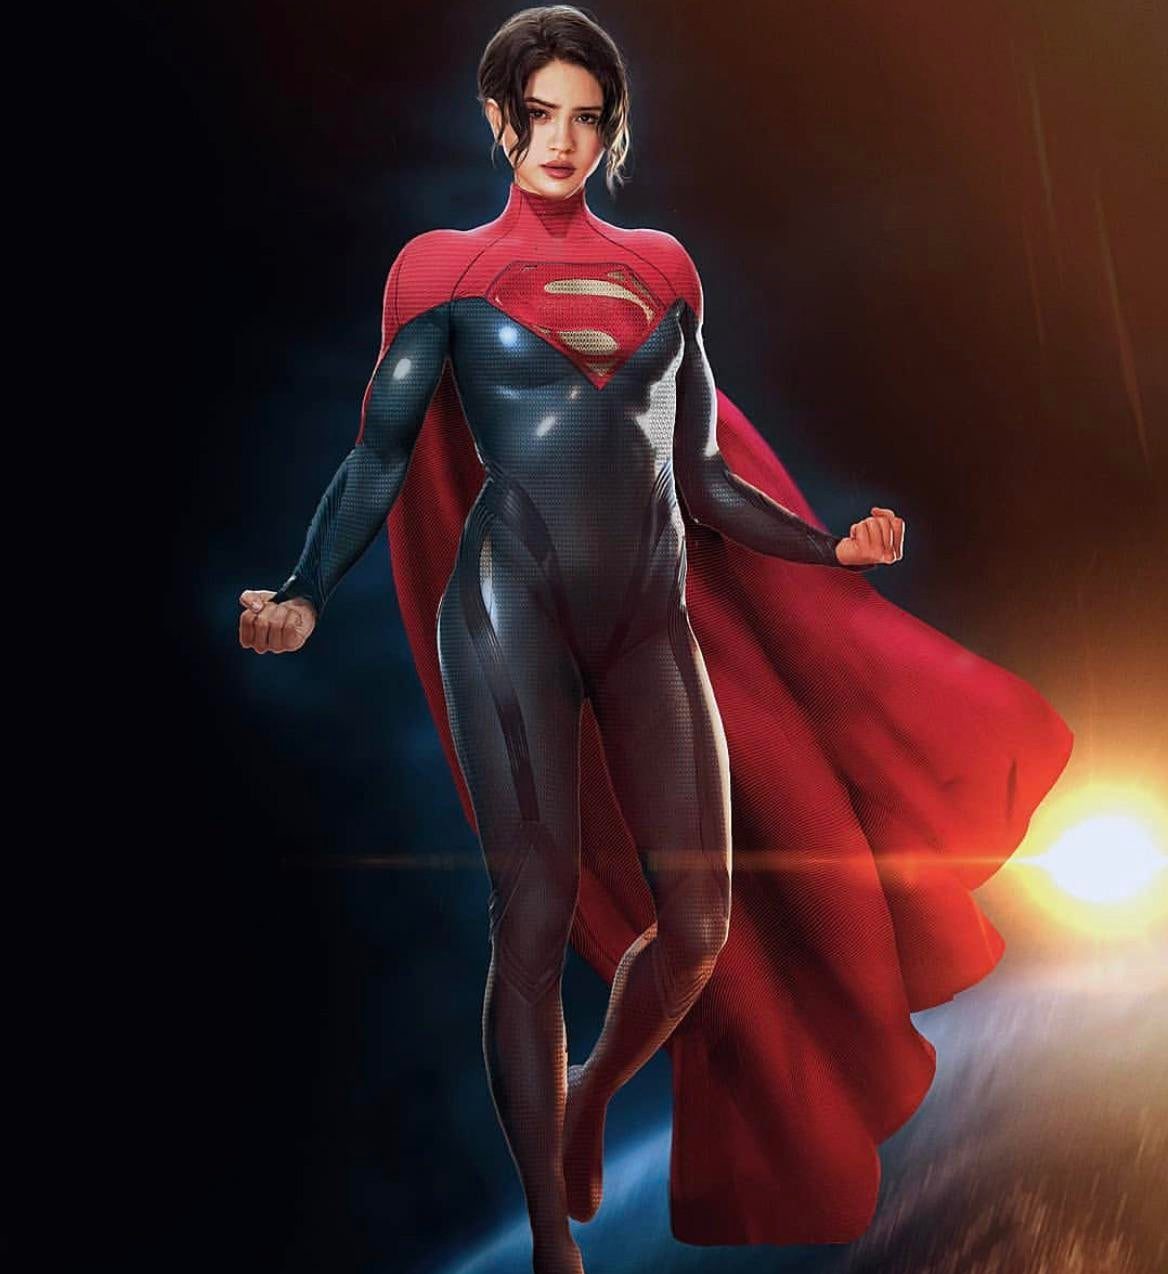 Supergirl in The Flash